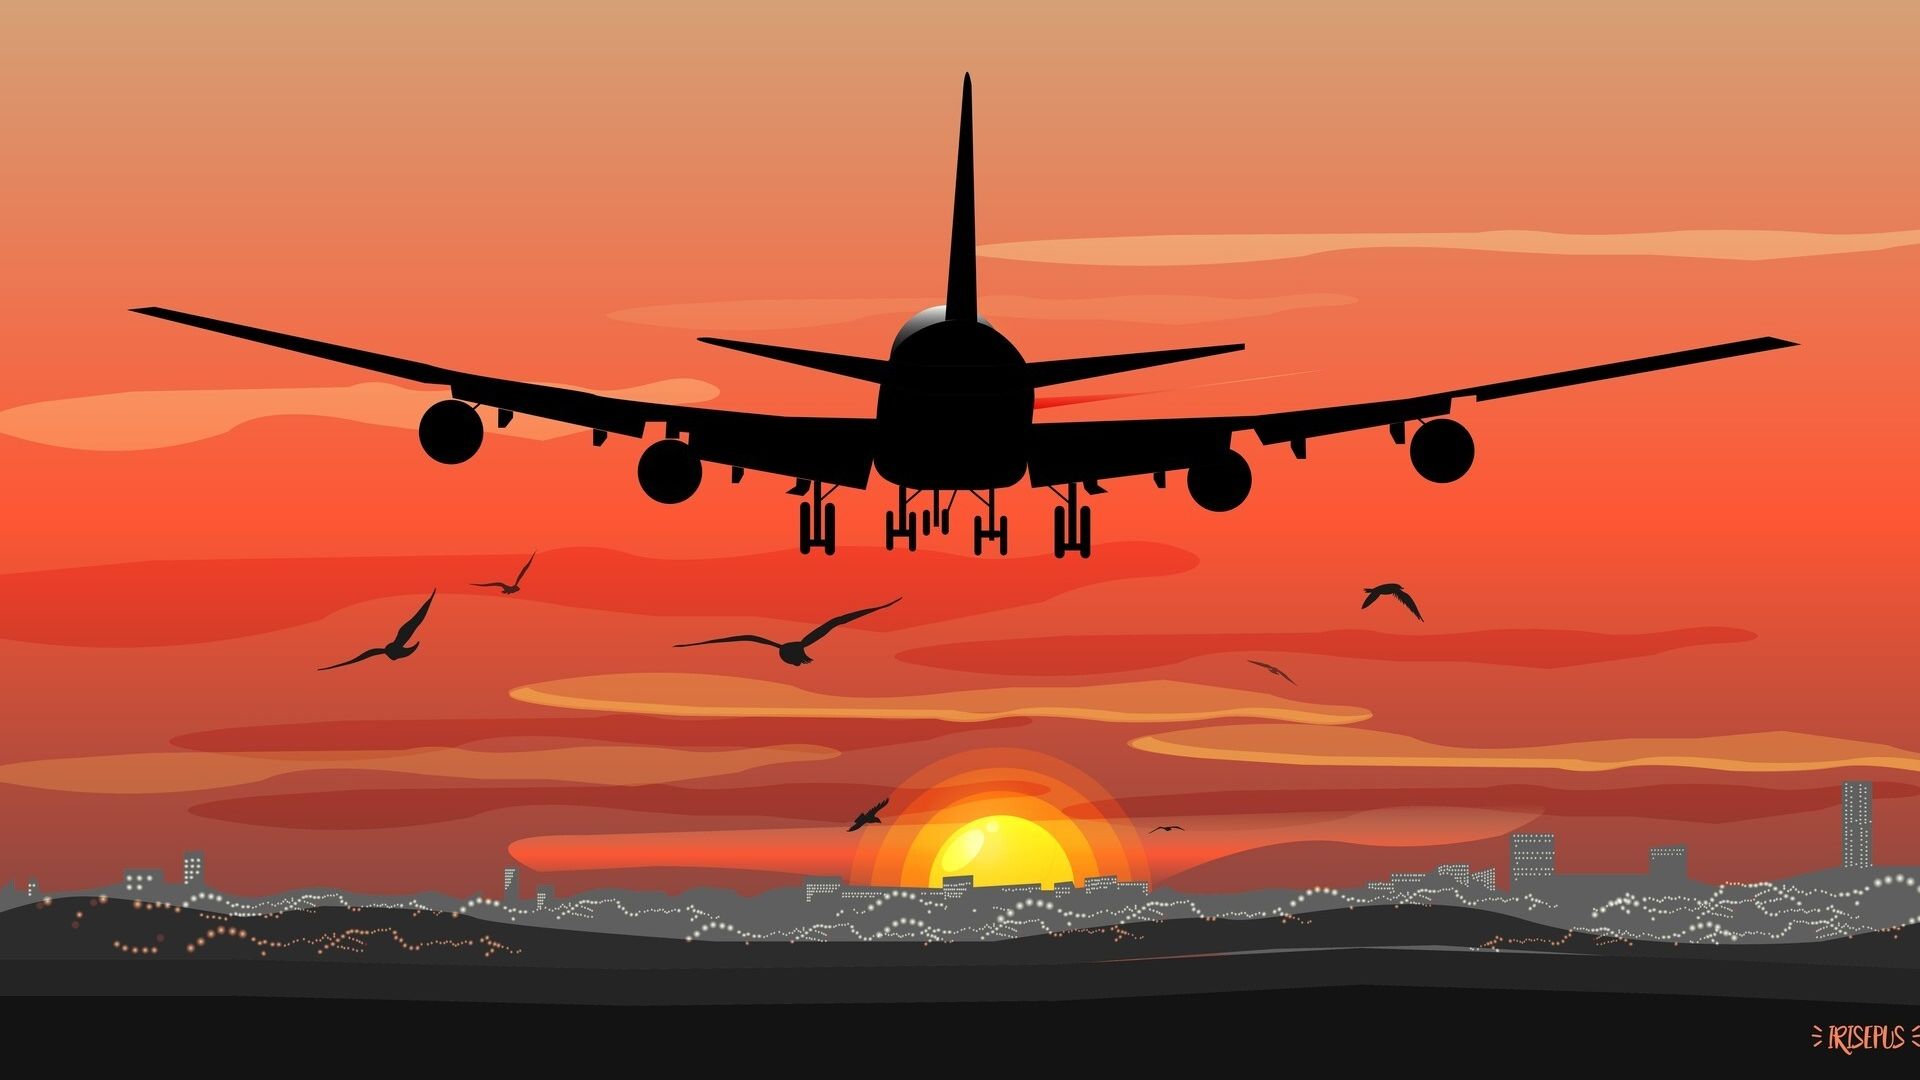 Desktop Wallpaper Silhouette, Airplane, Sunset, Art, HD Image, Picture, Background, 73c888